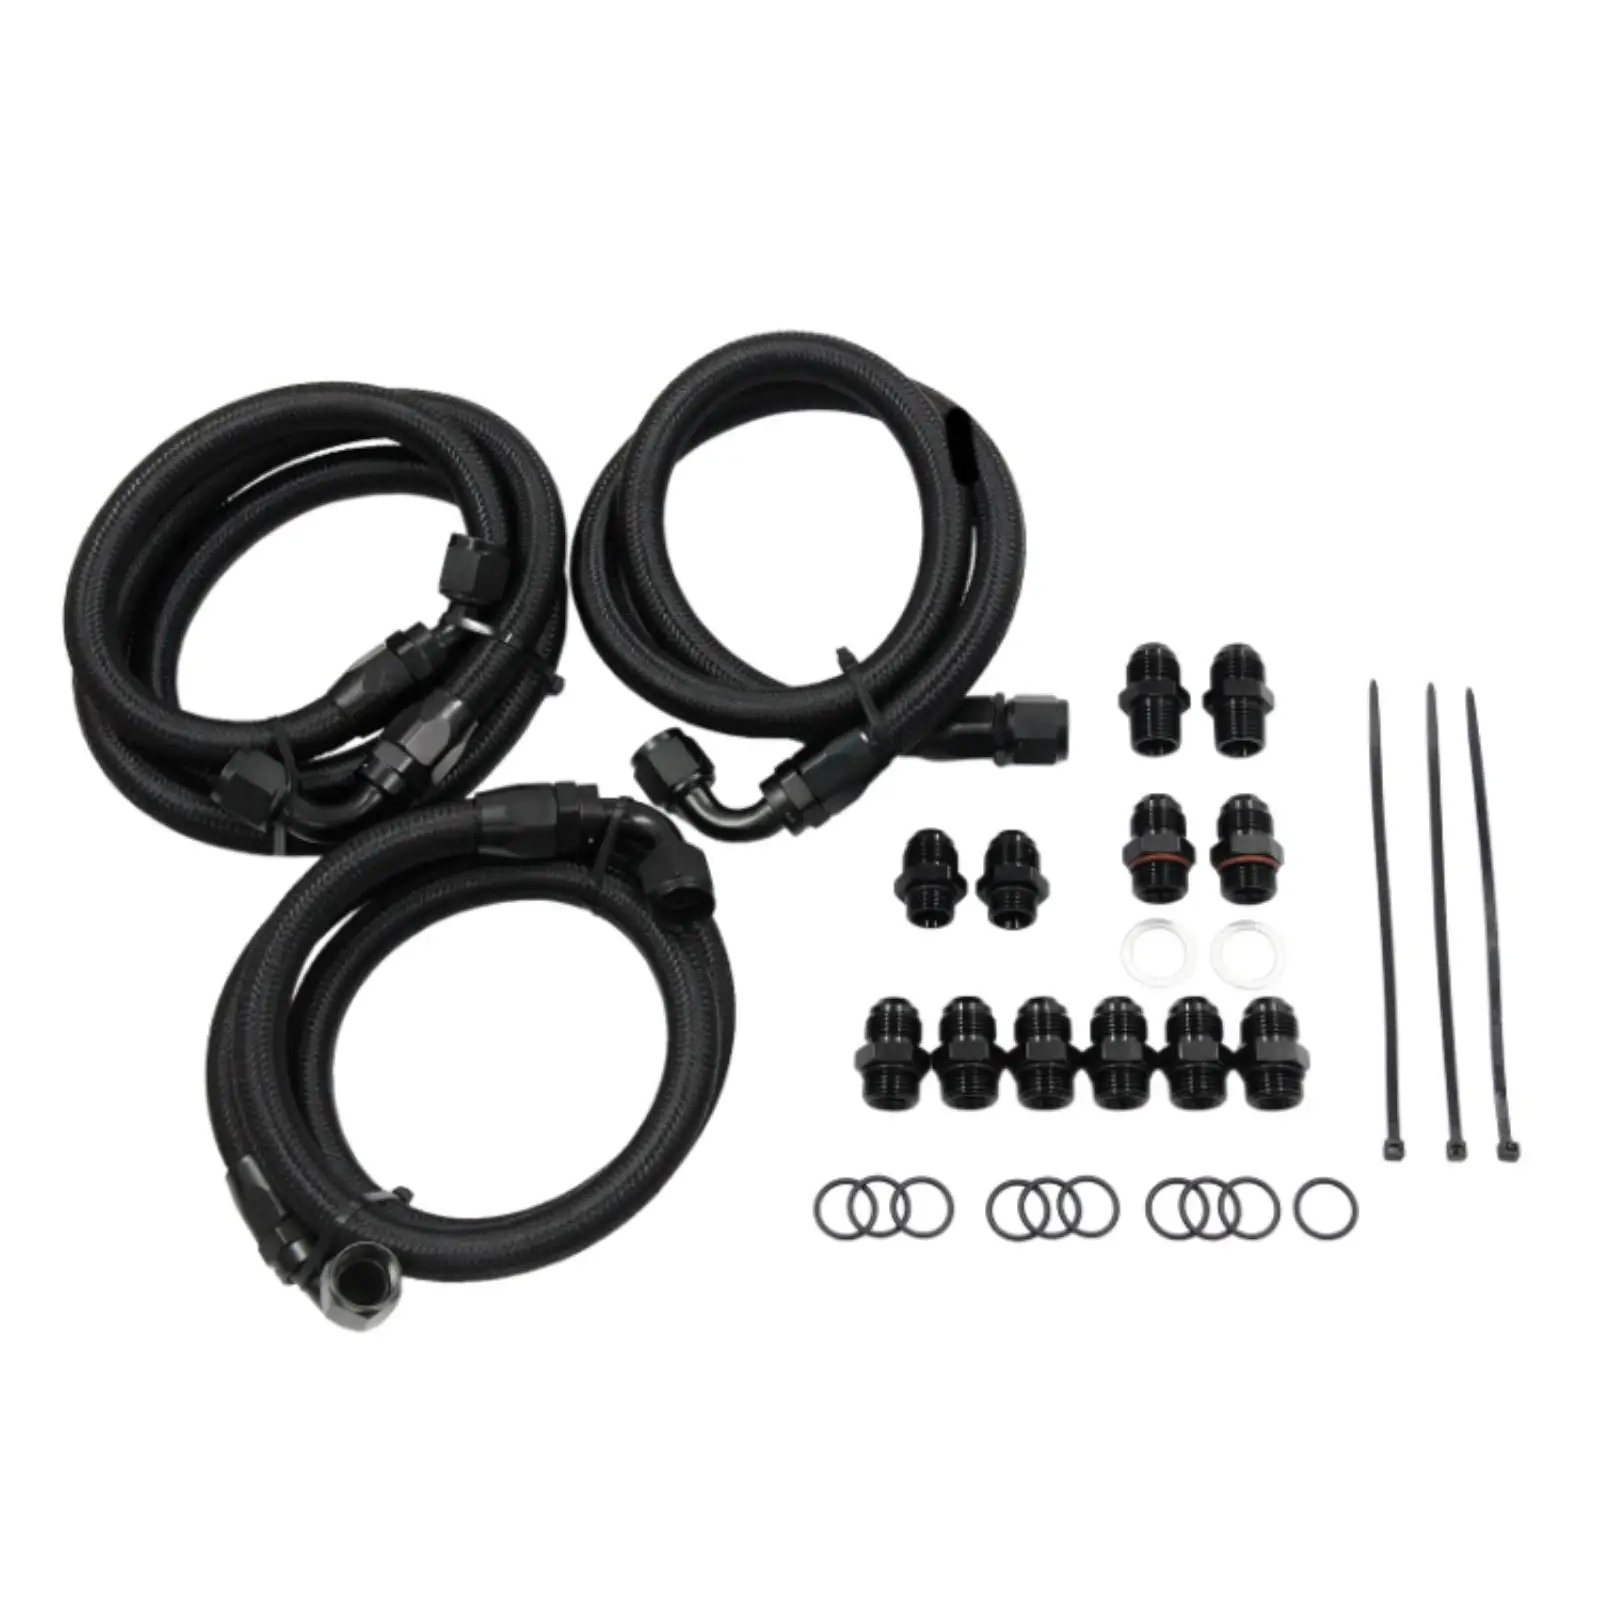 Transmission Cooler Hose Line Kit Metal High Performance Easy to Install Professional Accessory for GM 6.6 lb7 Lly Duramax